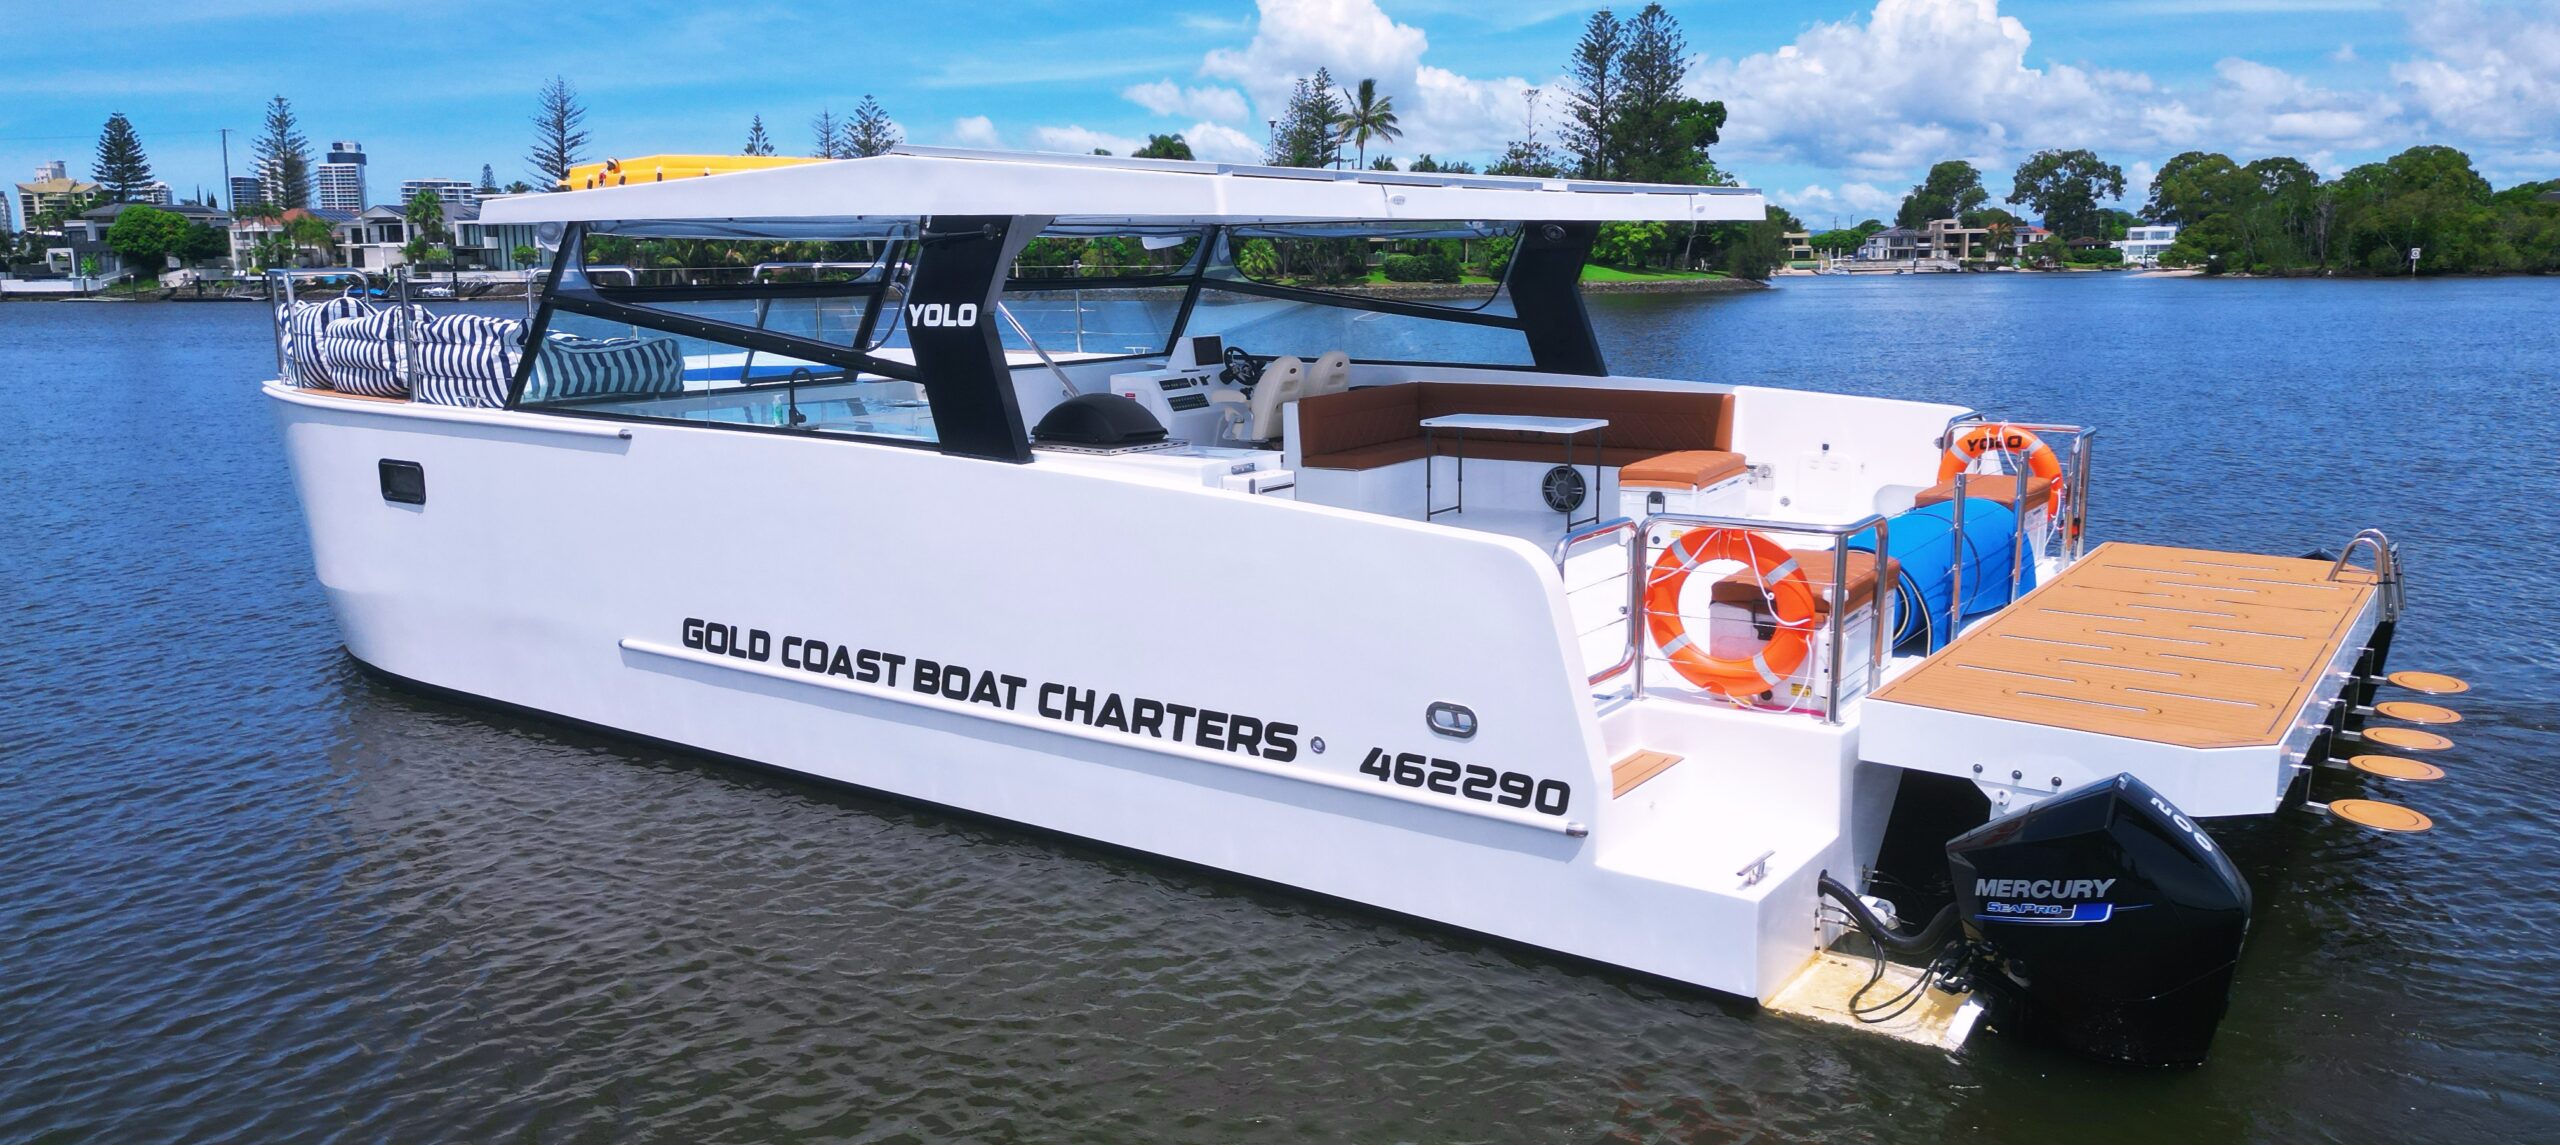 GC Boat Charters